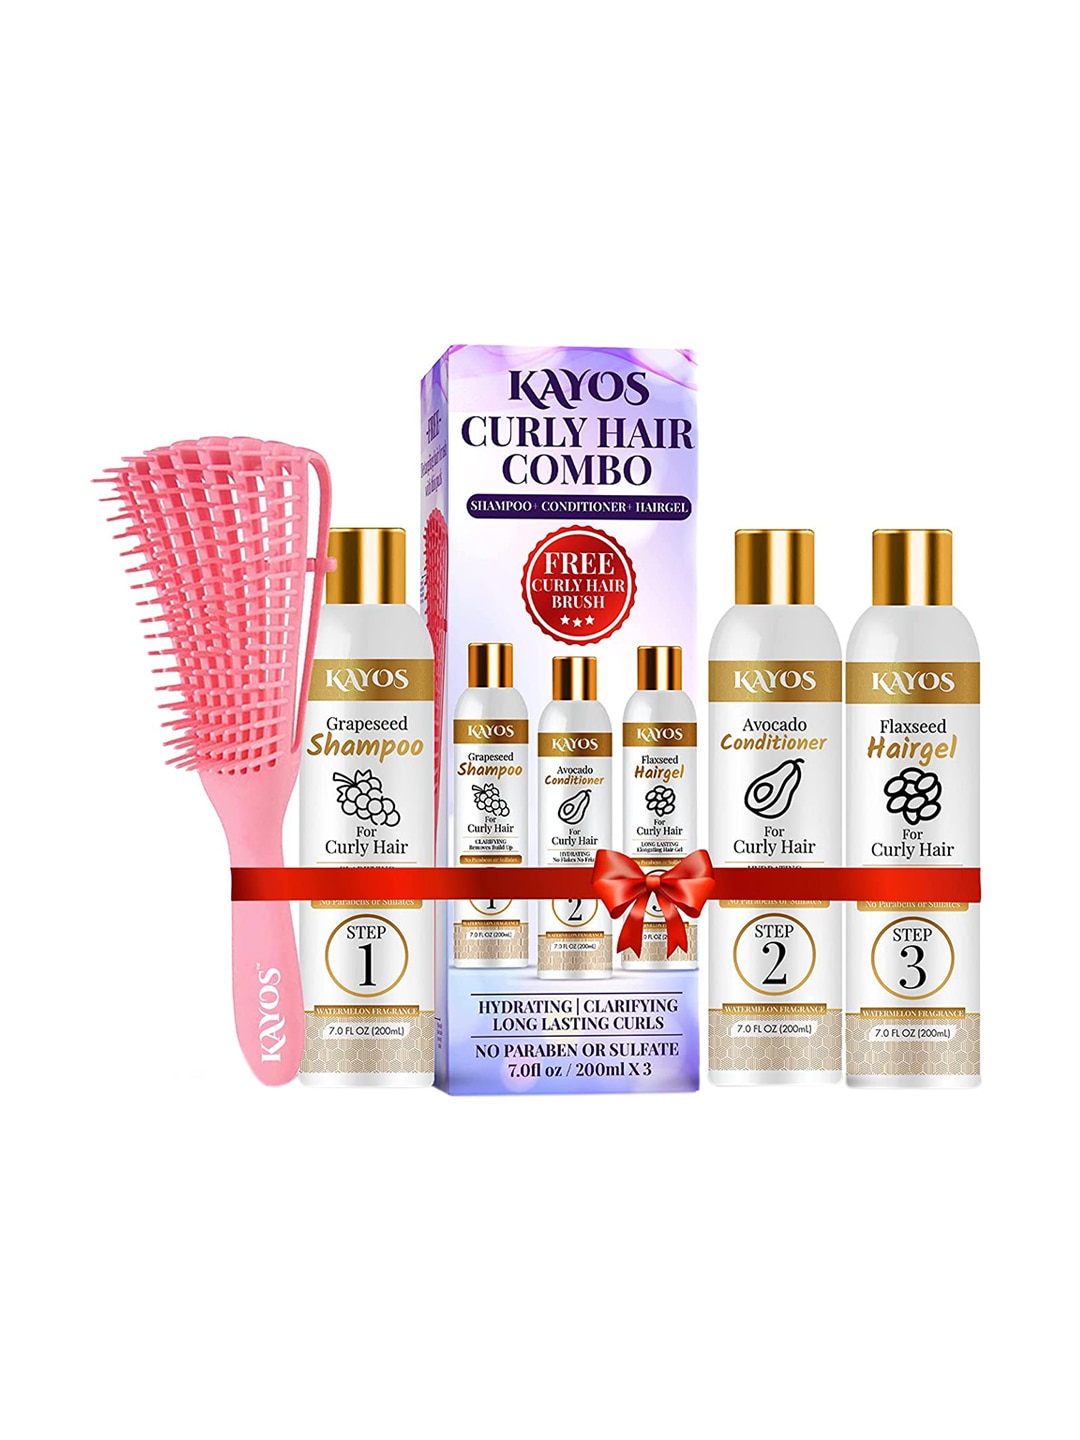 Kayos Curly Hair Care Combo With Shampoo, Conditioner, Hair Gel And Free Curly Hair Brush Price in India